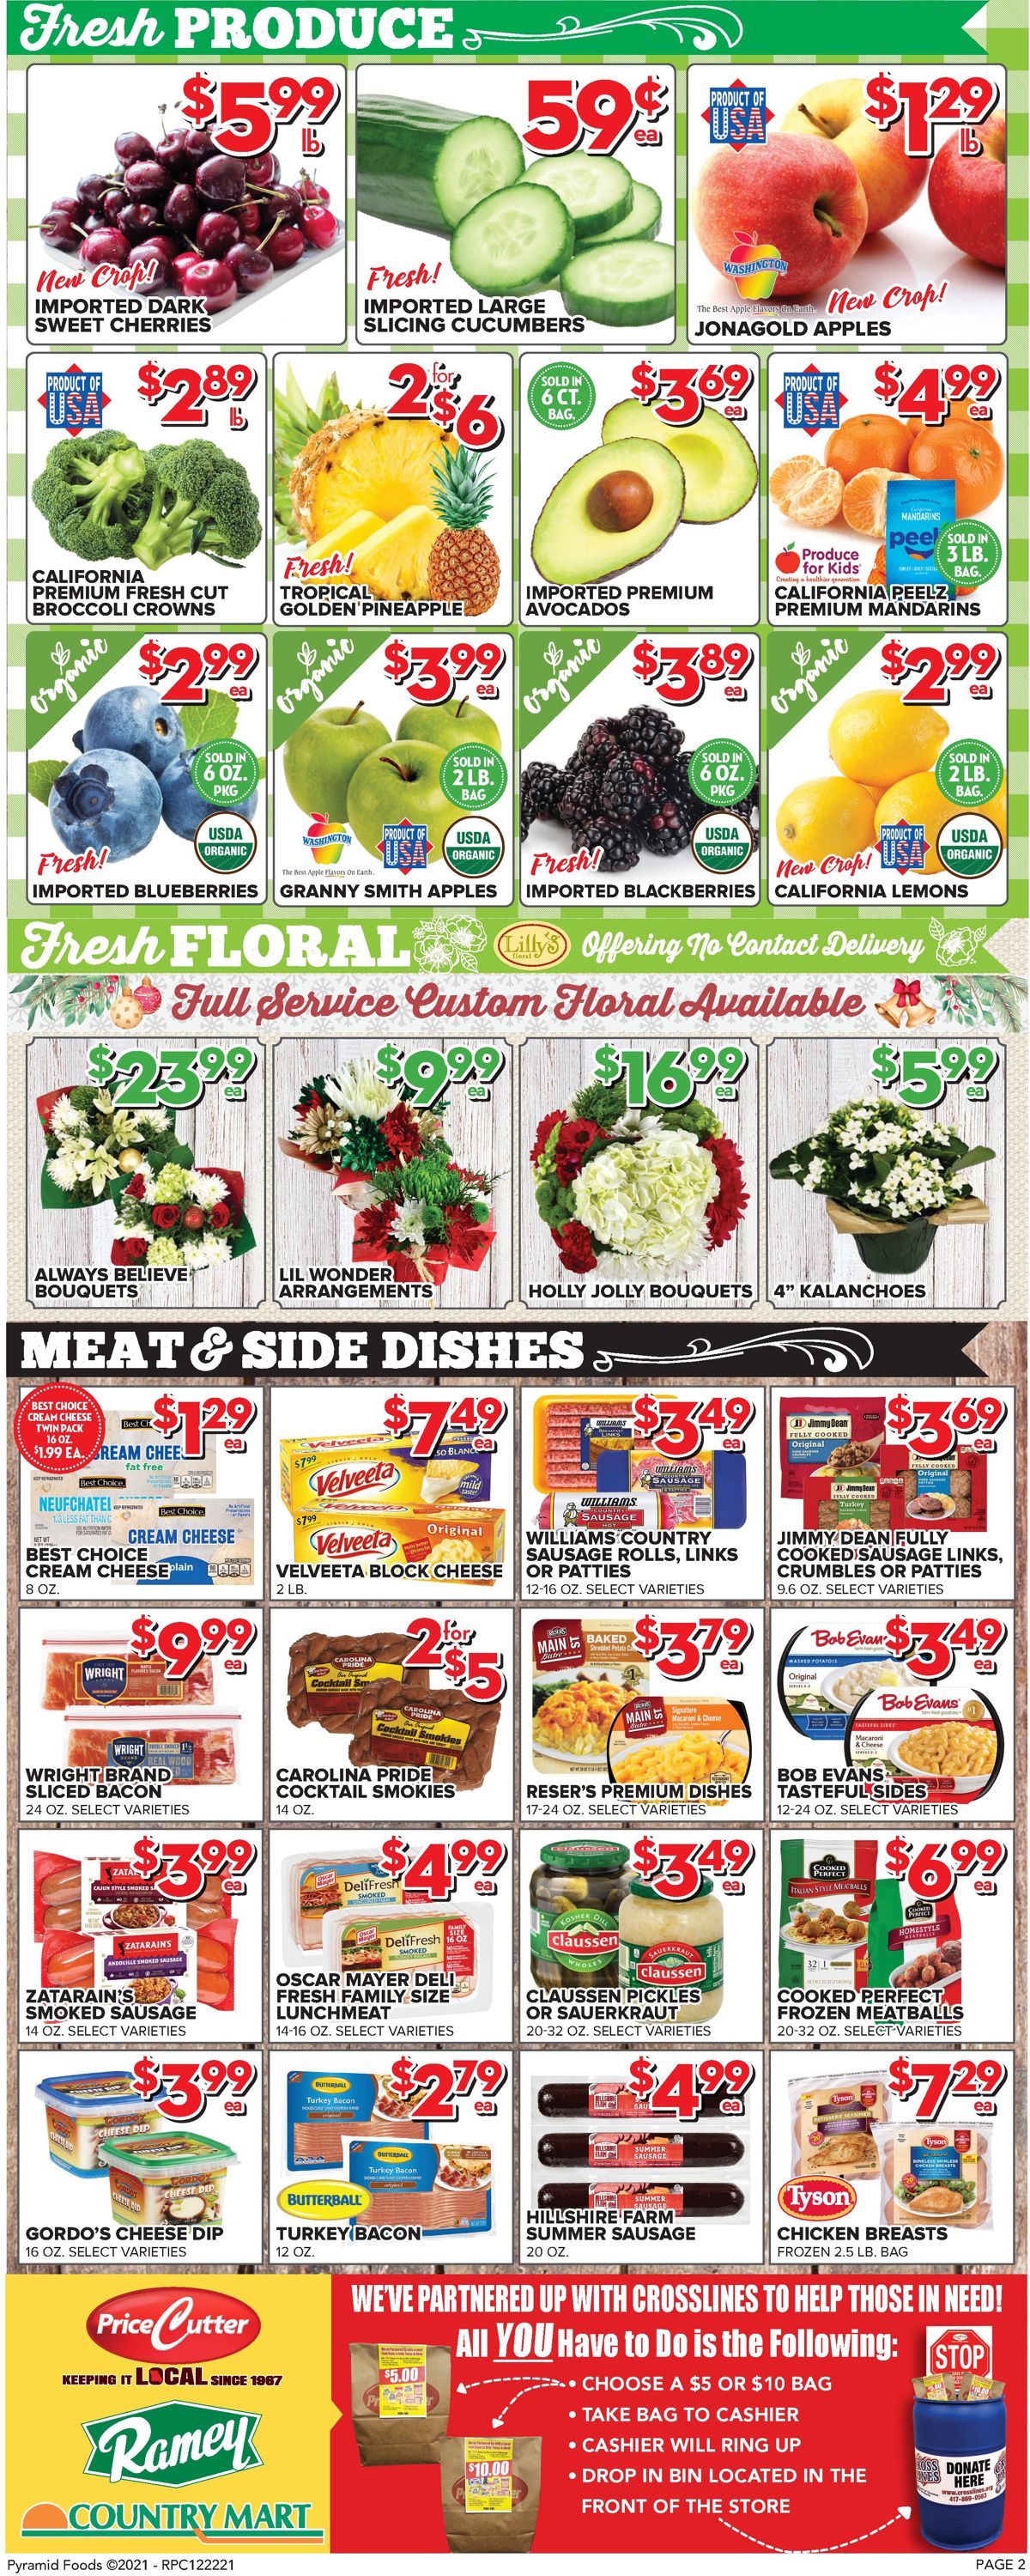 Price Cutter CHRISTMAS 2021 Weekly Ad Circular - valid 12/22-12/28/2021 (Page 2)